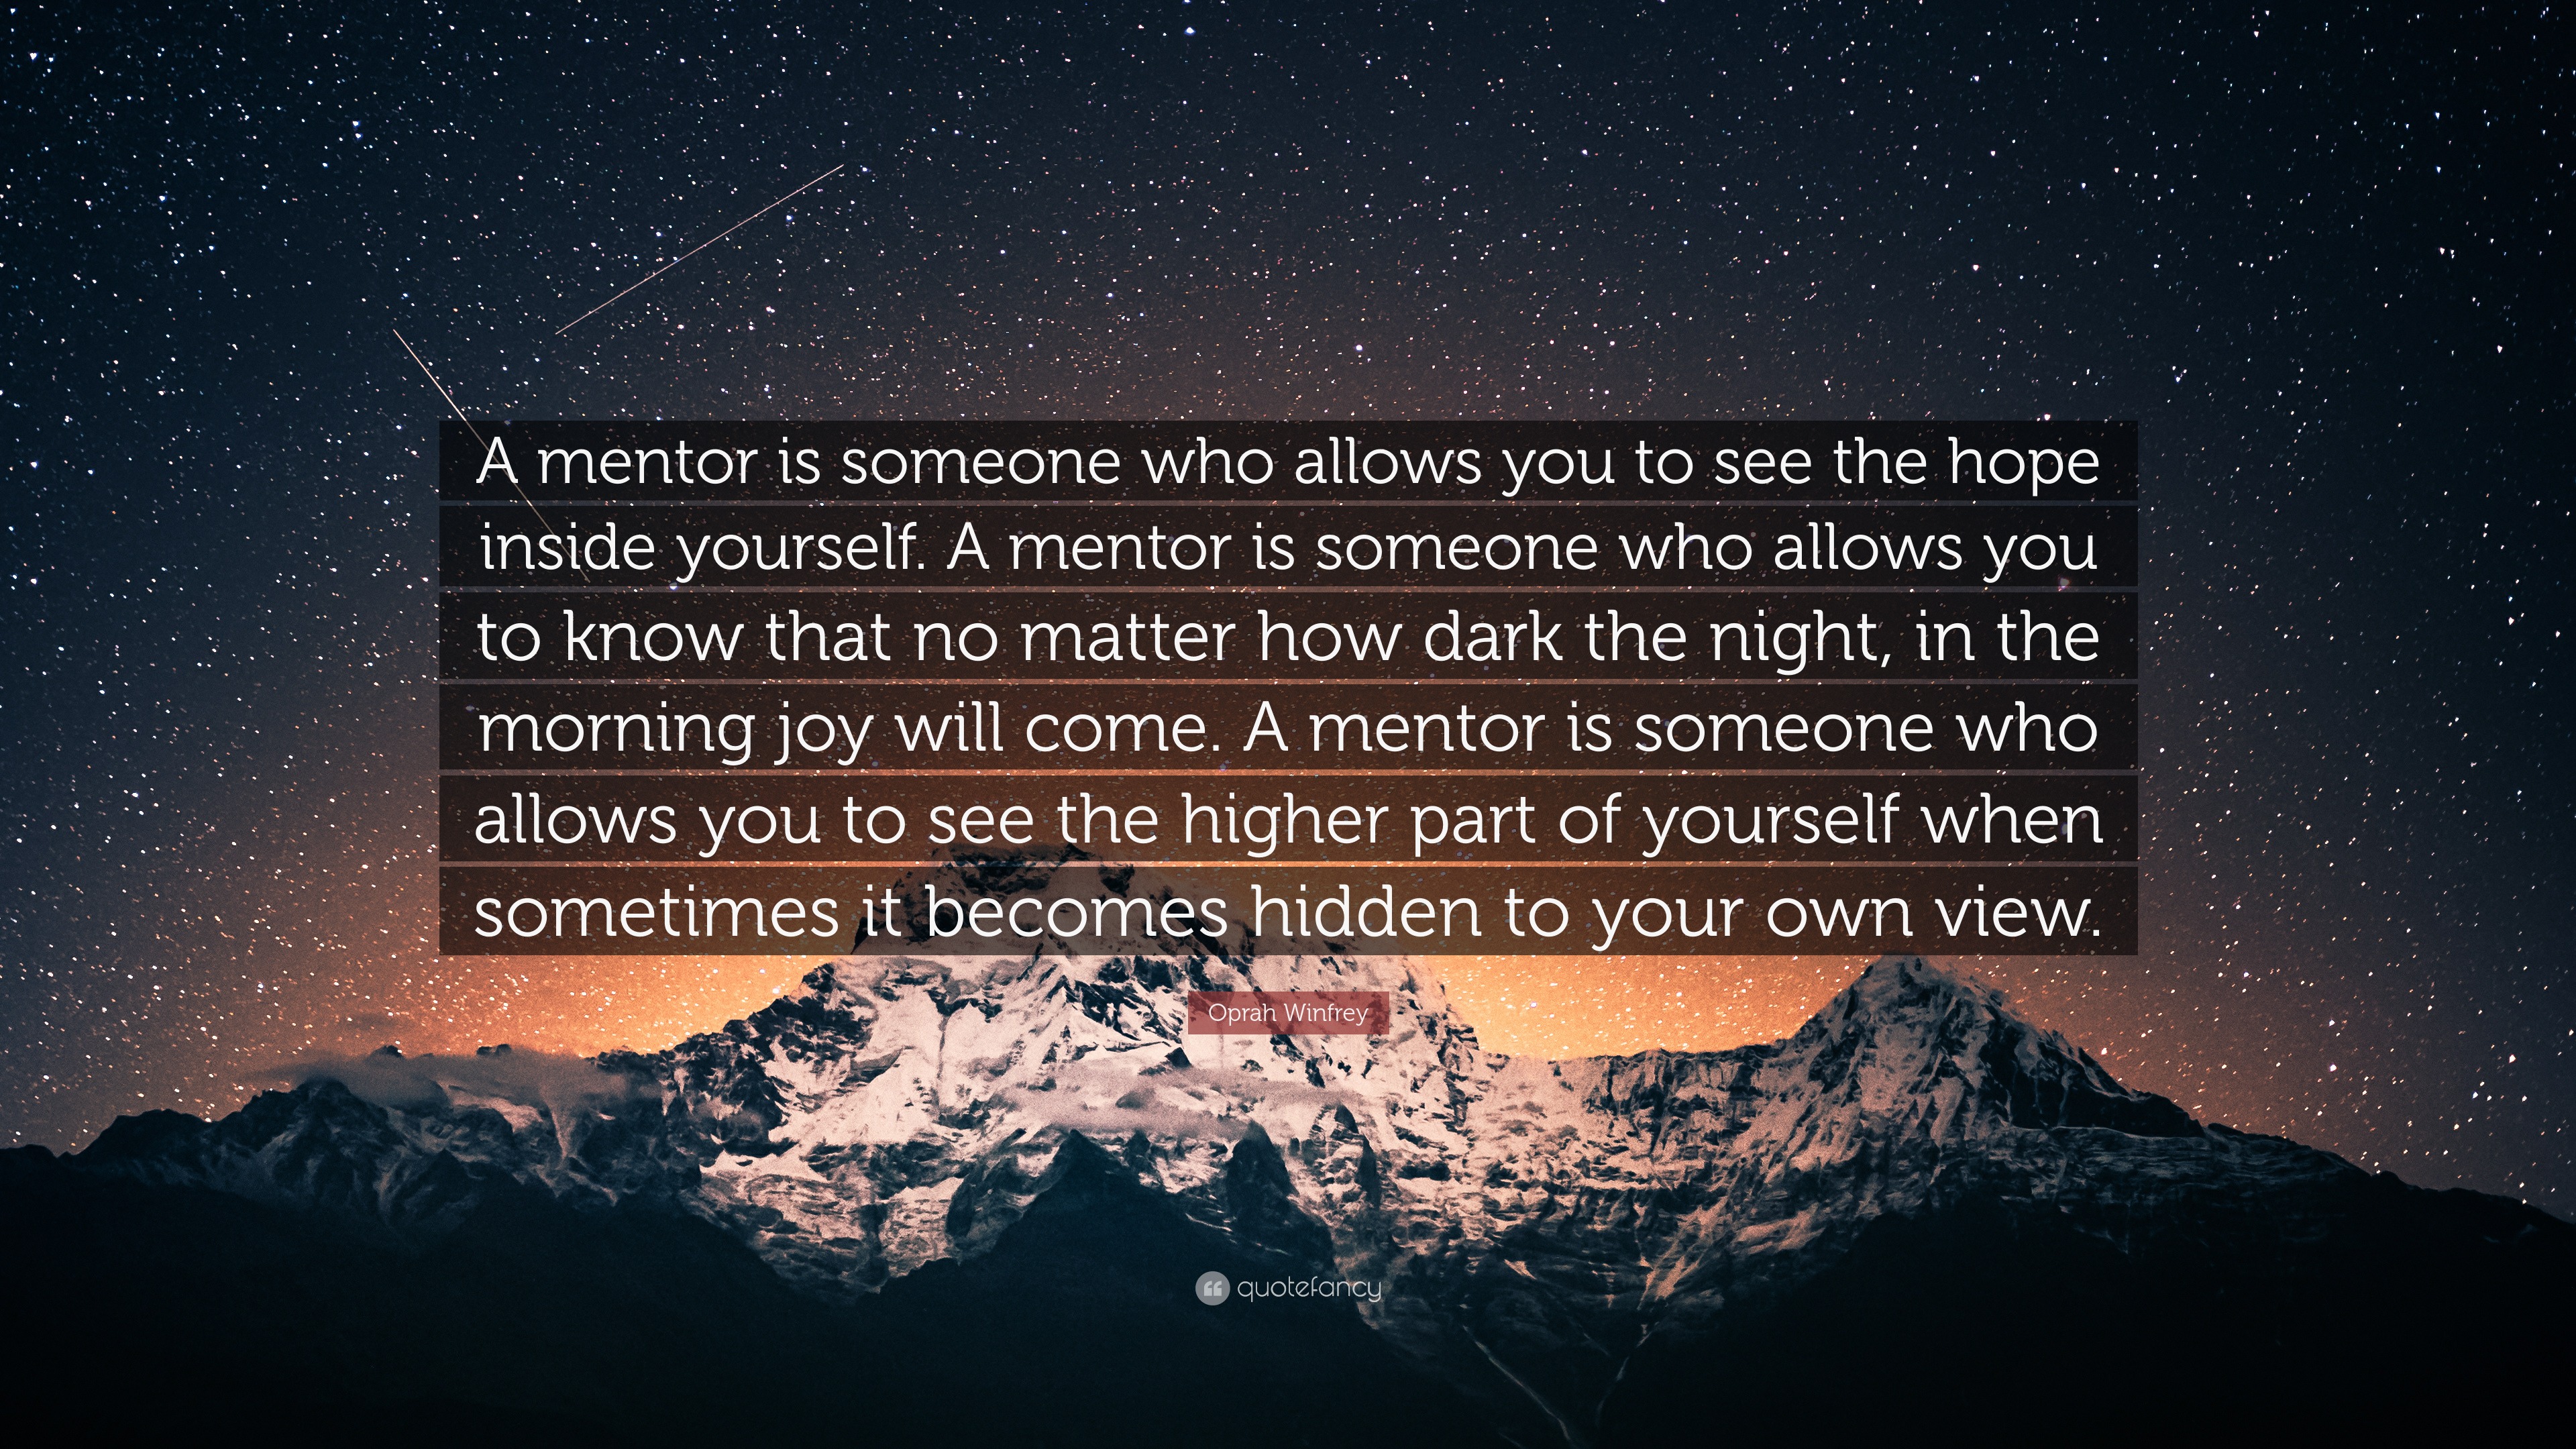 Oprah Winfrey Quote: “A mentor is someone who allows you to see the